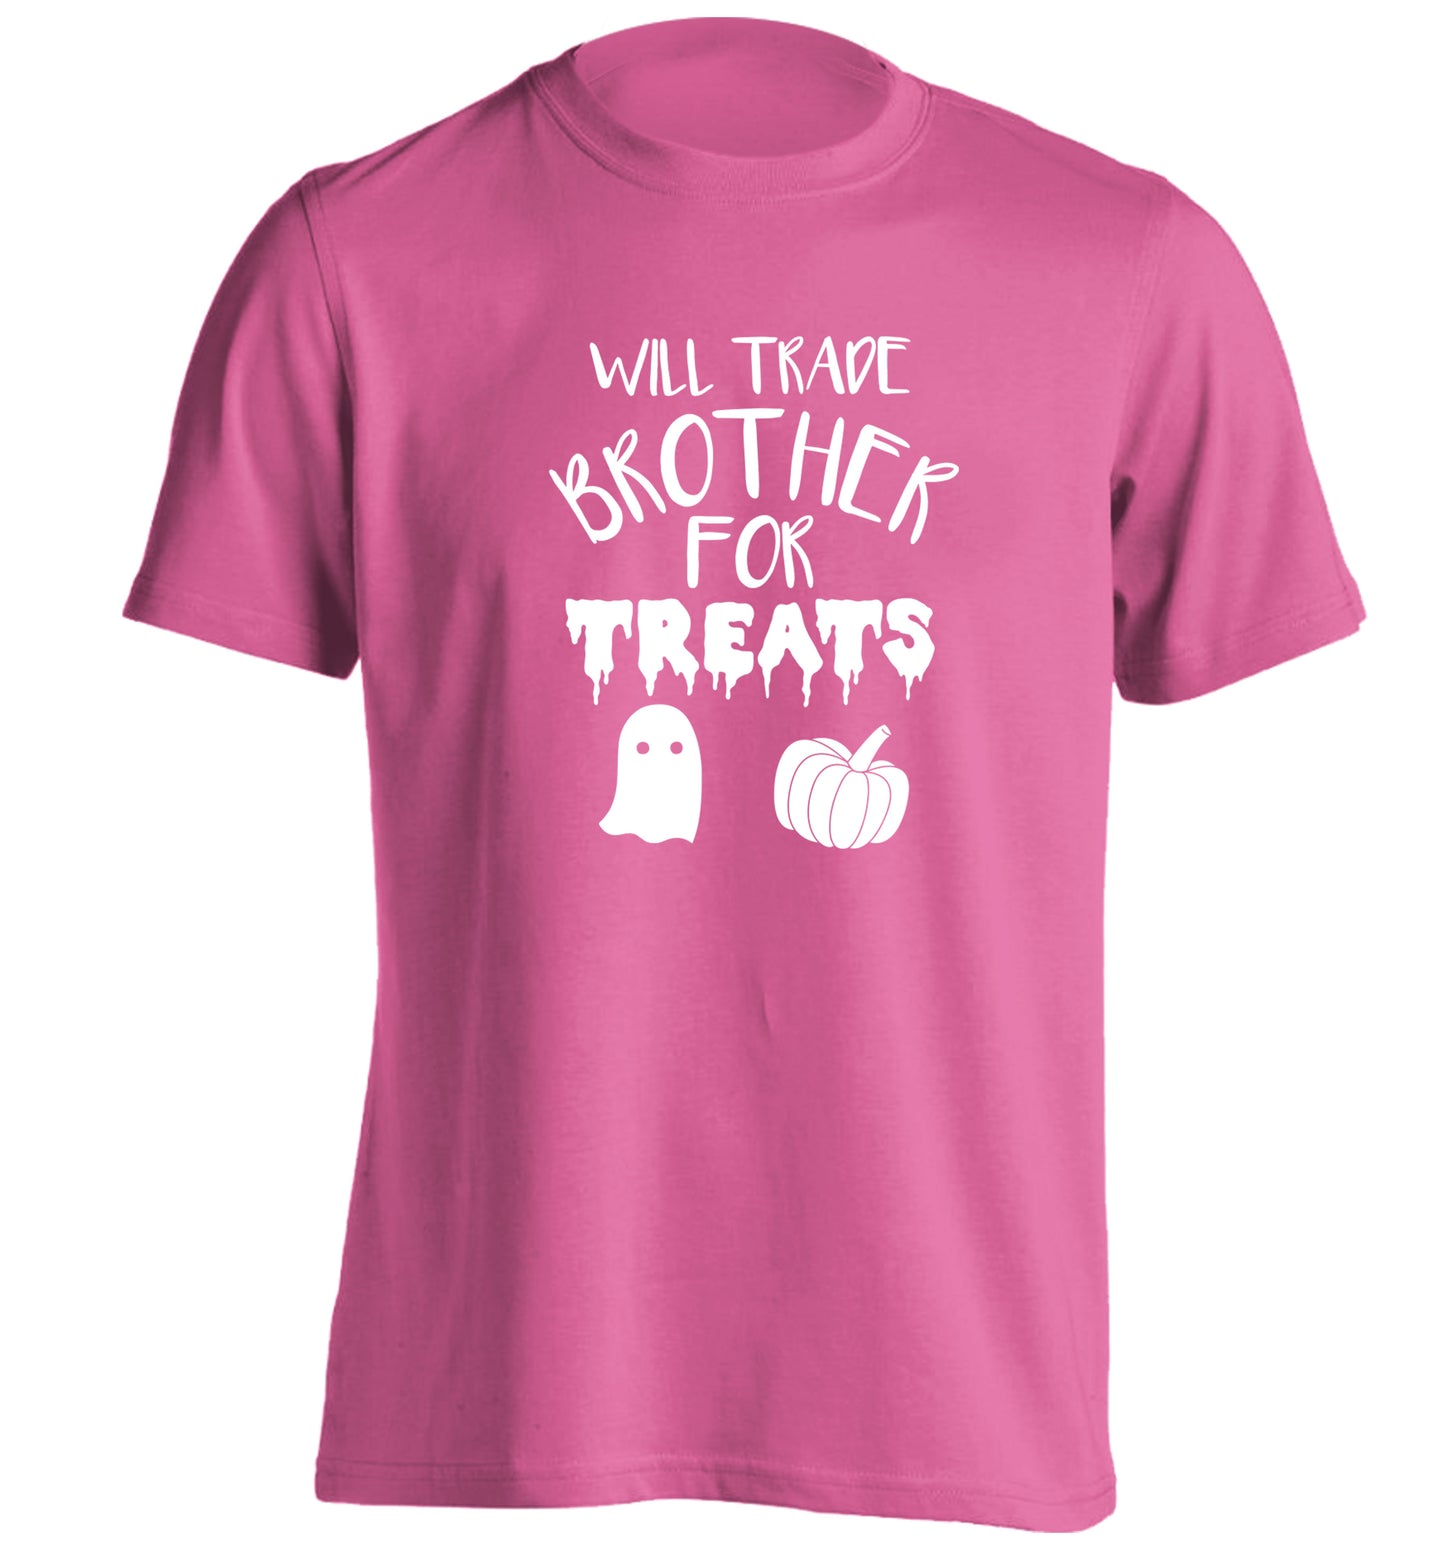 Will trade brother for sweets adults unisex pink Tshirt 2XL